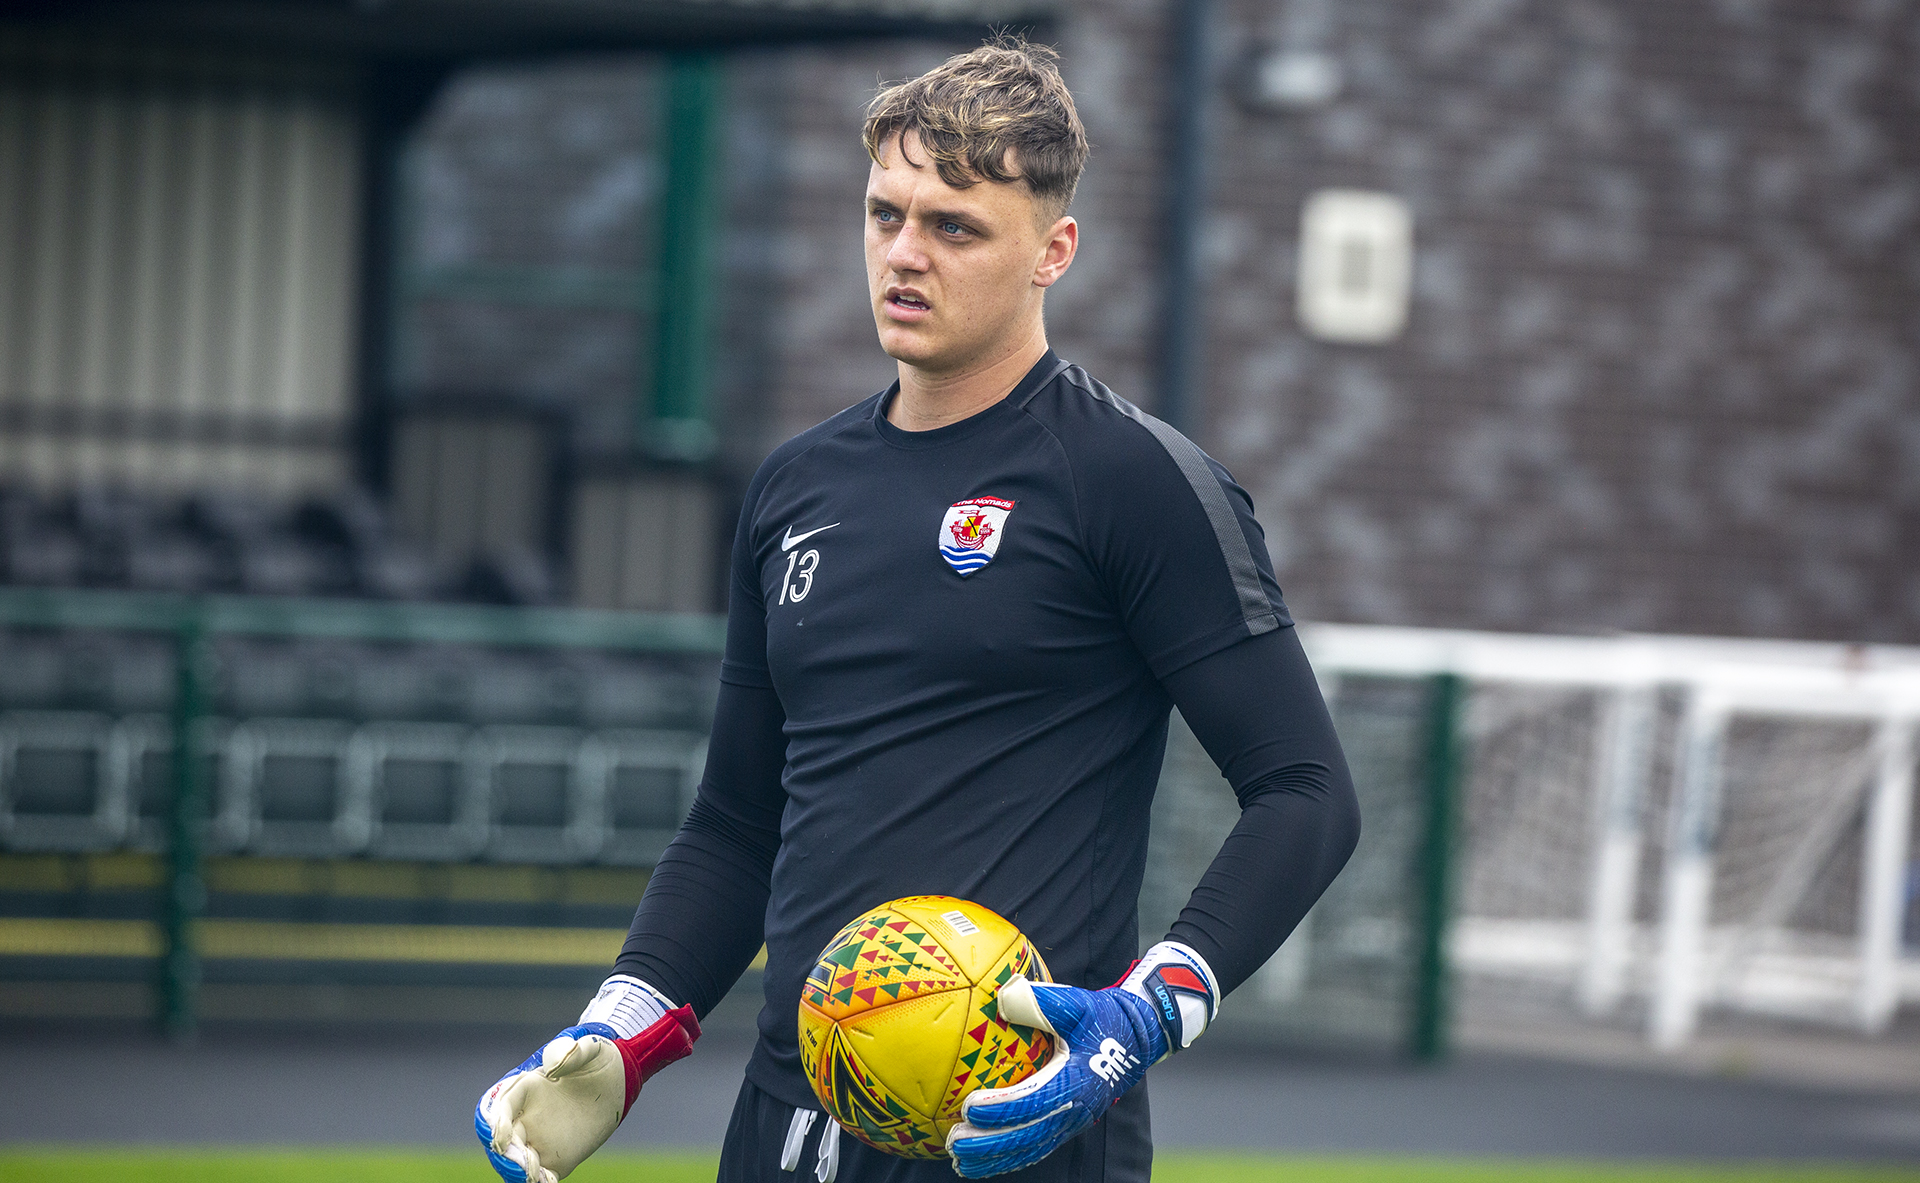 Oliver Byrne has been promoted to The Nomads' first choice goalkeeper | © NCM Media